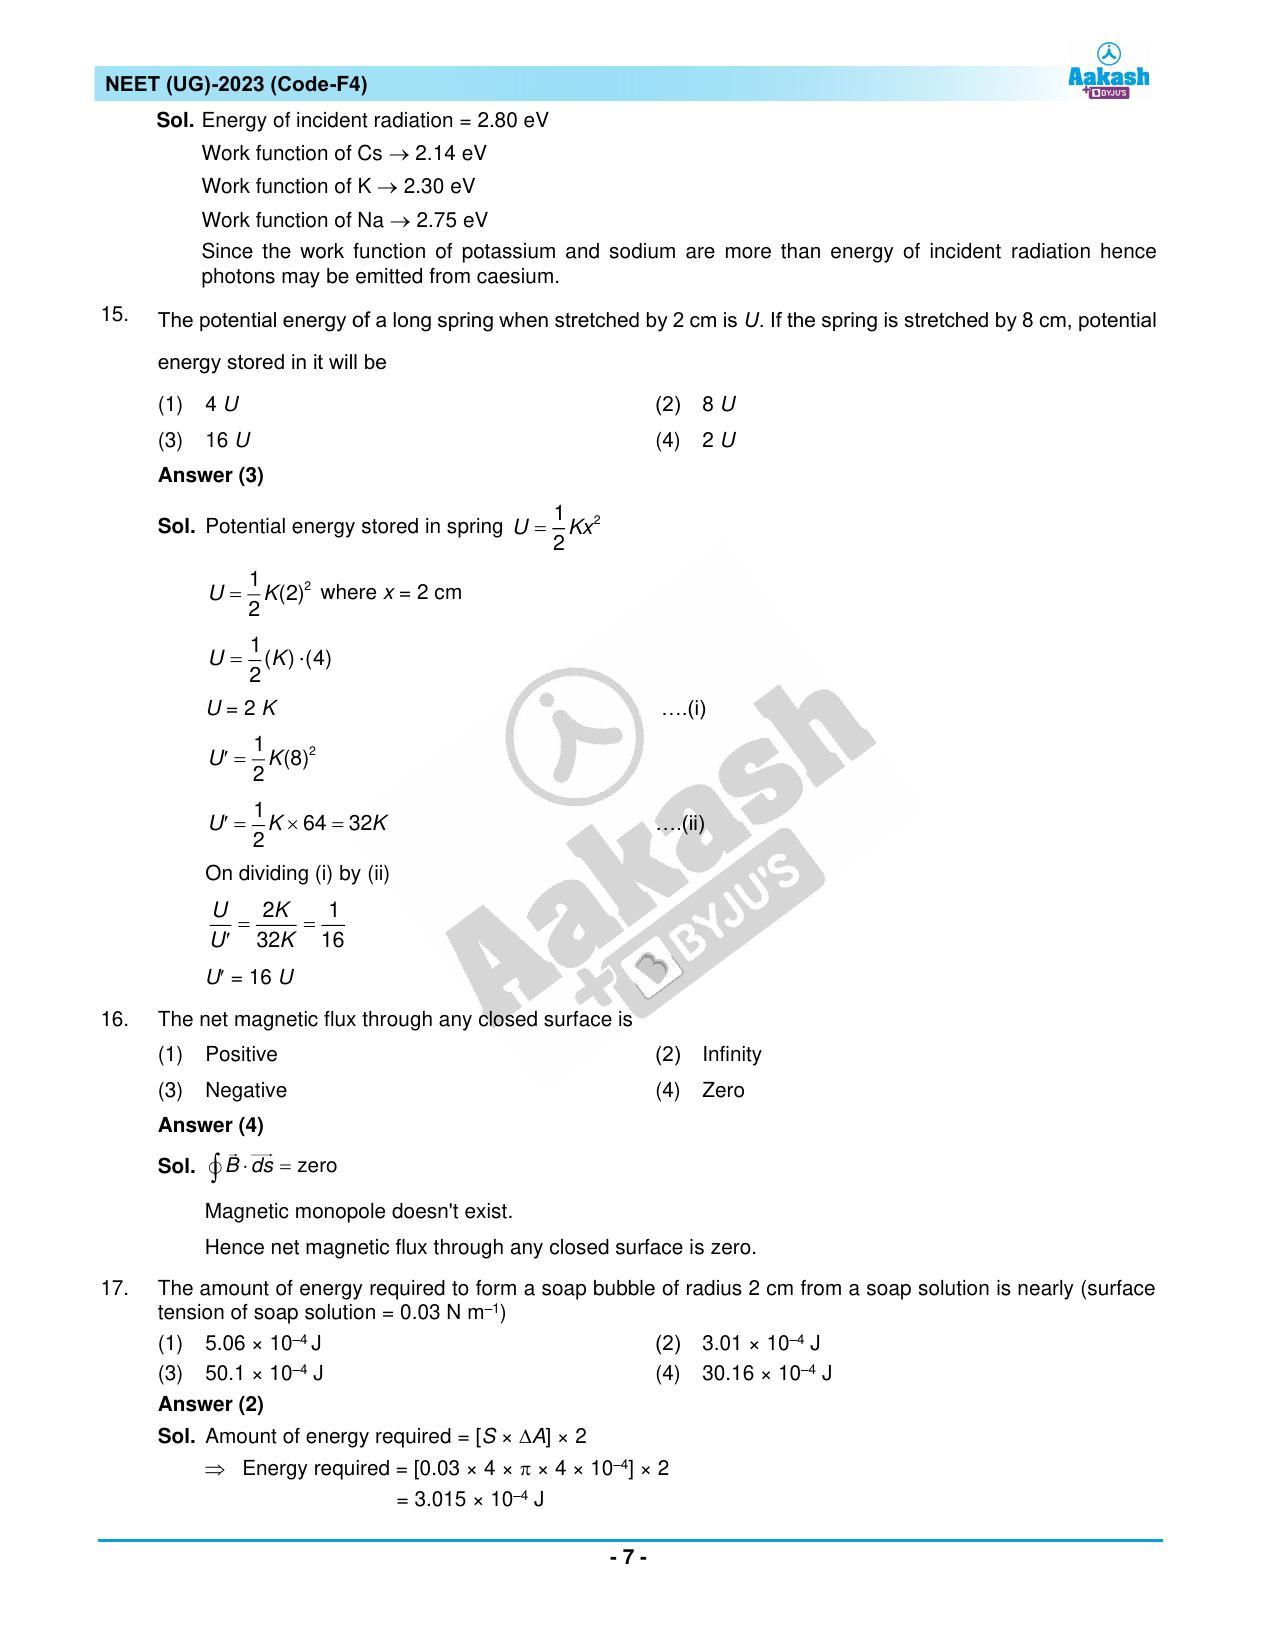 NEET 2023 Question Paper F4 - Page 7